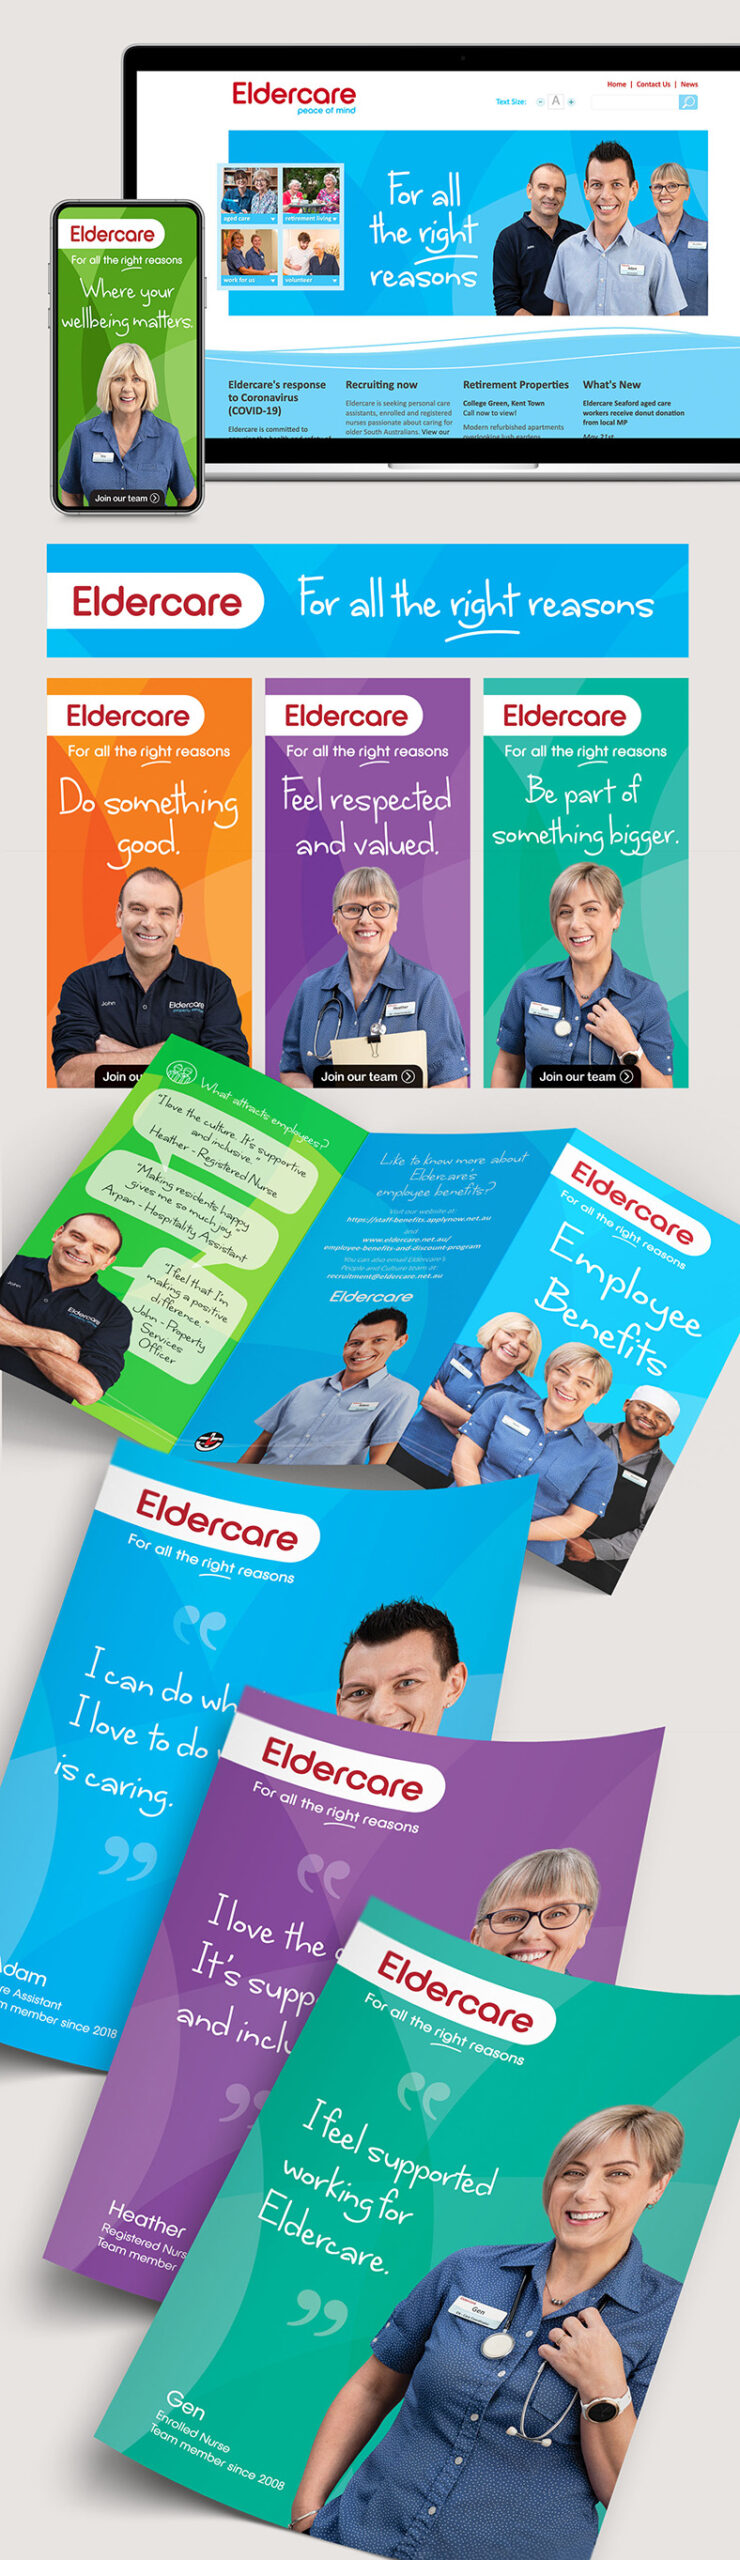 Eldercare Employer Of Choice Campaign